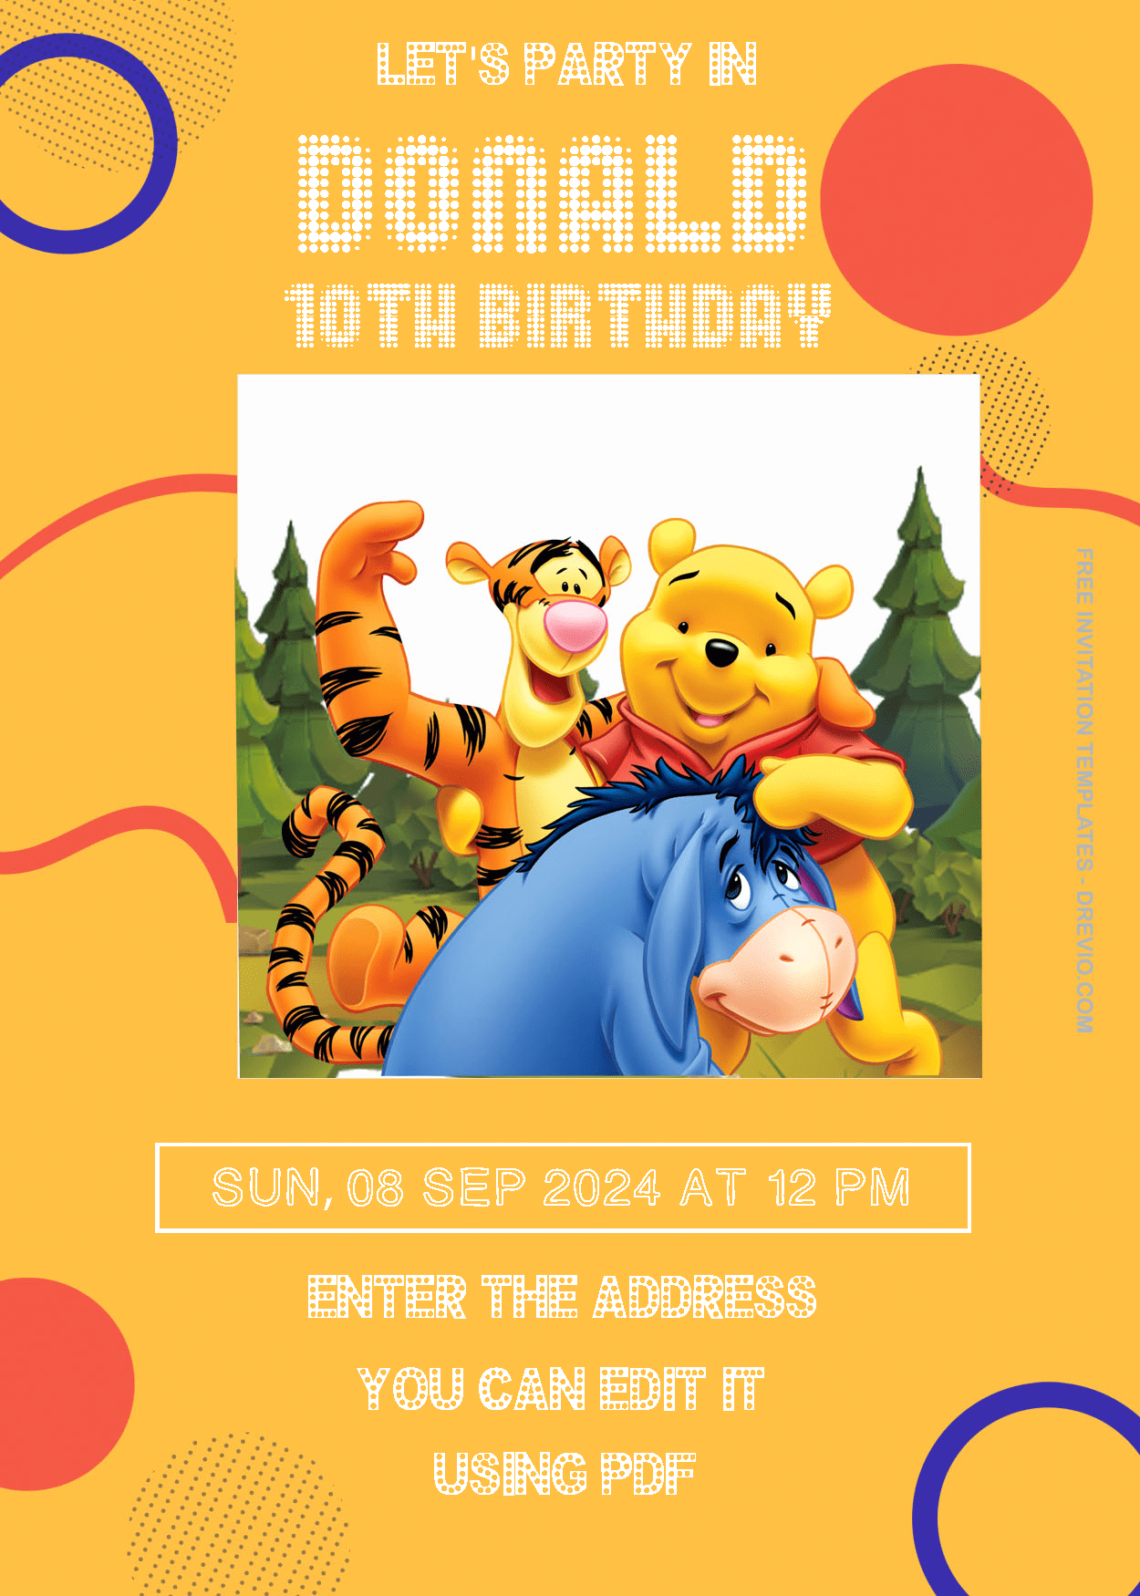 ( Free Editable PDF ) Winnie The Pooh In The House Birthday Invitation Templates Two